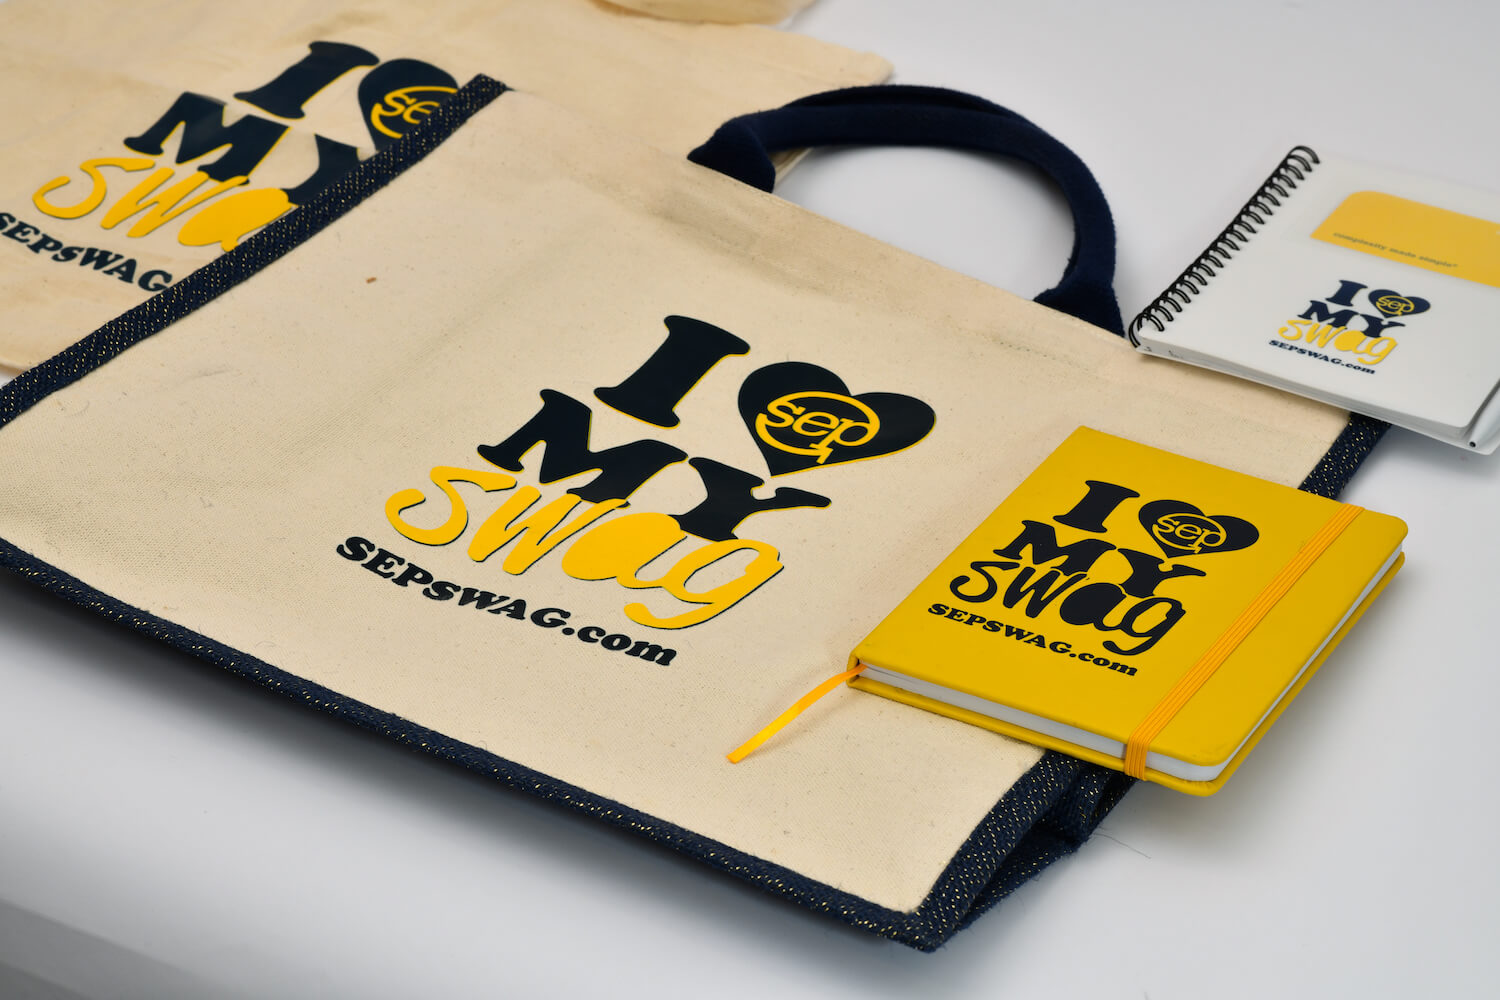 Tote bags and notebooks that say I Heart My Swag